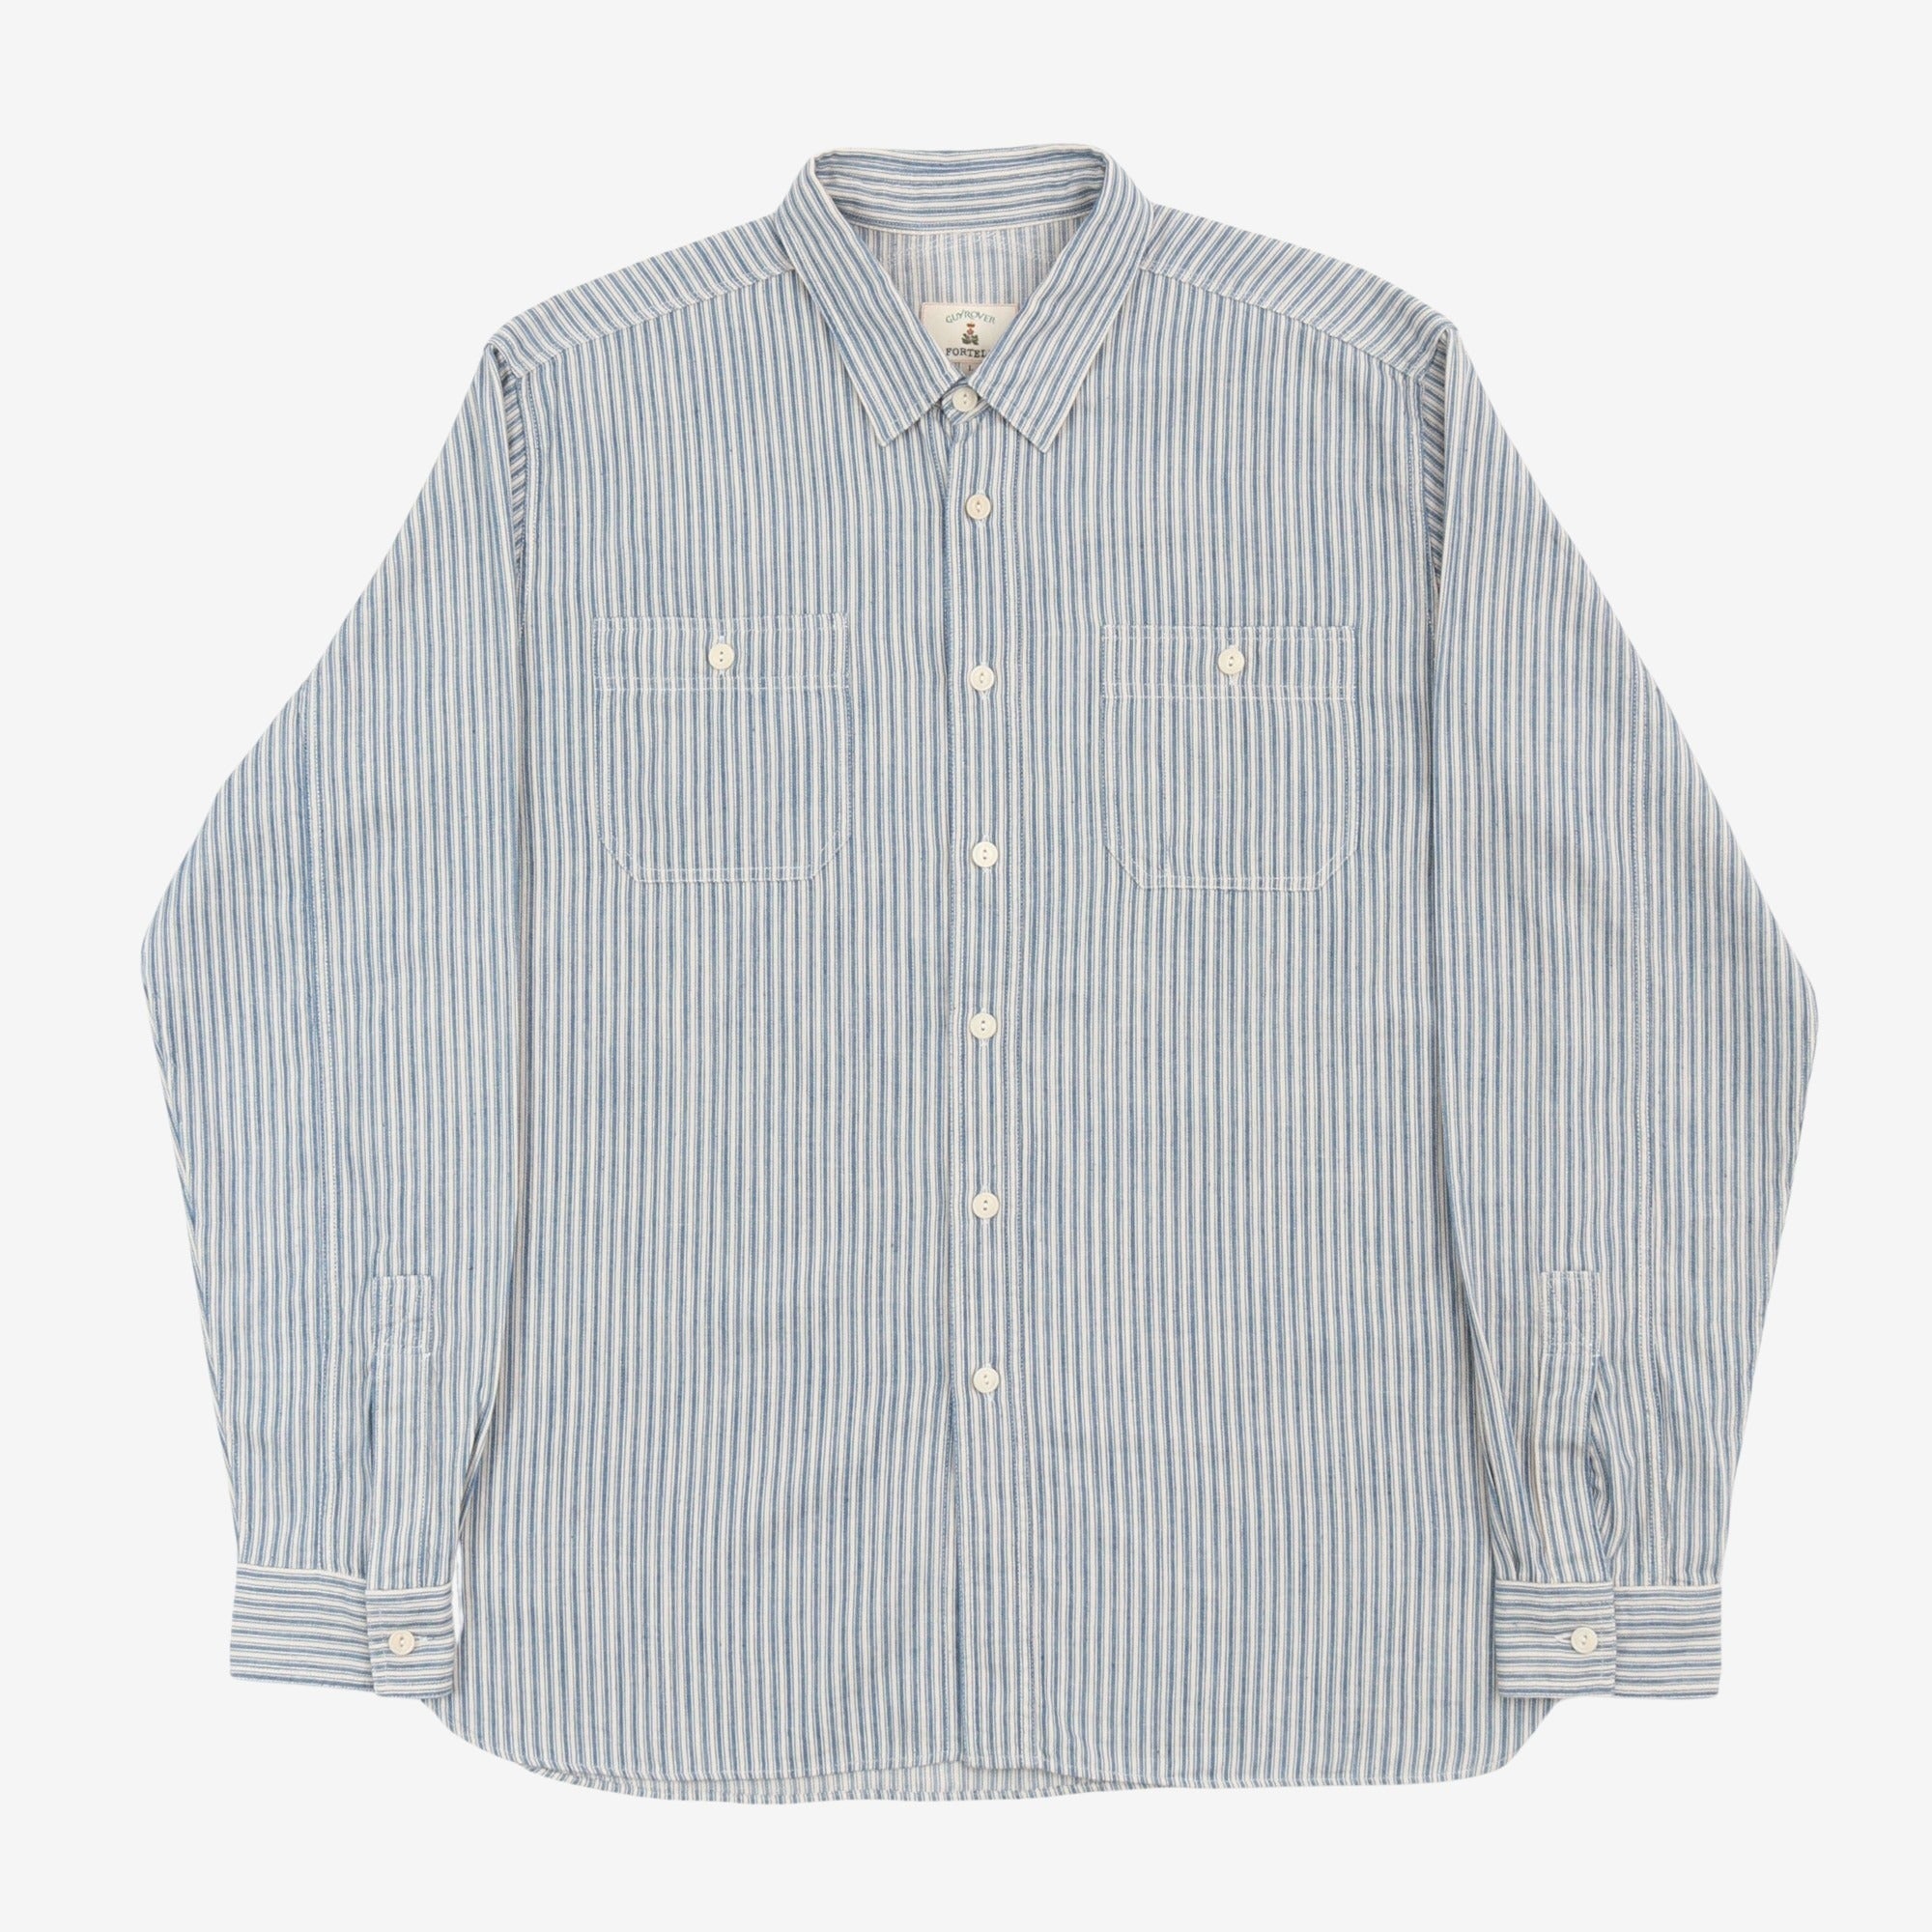 Guy Rover Striped Shirt